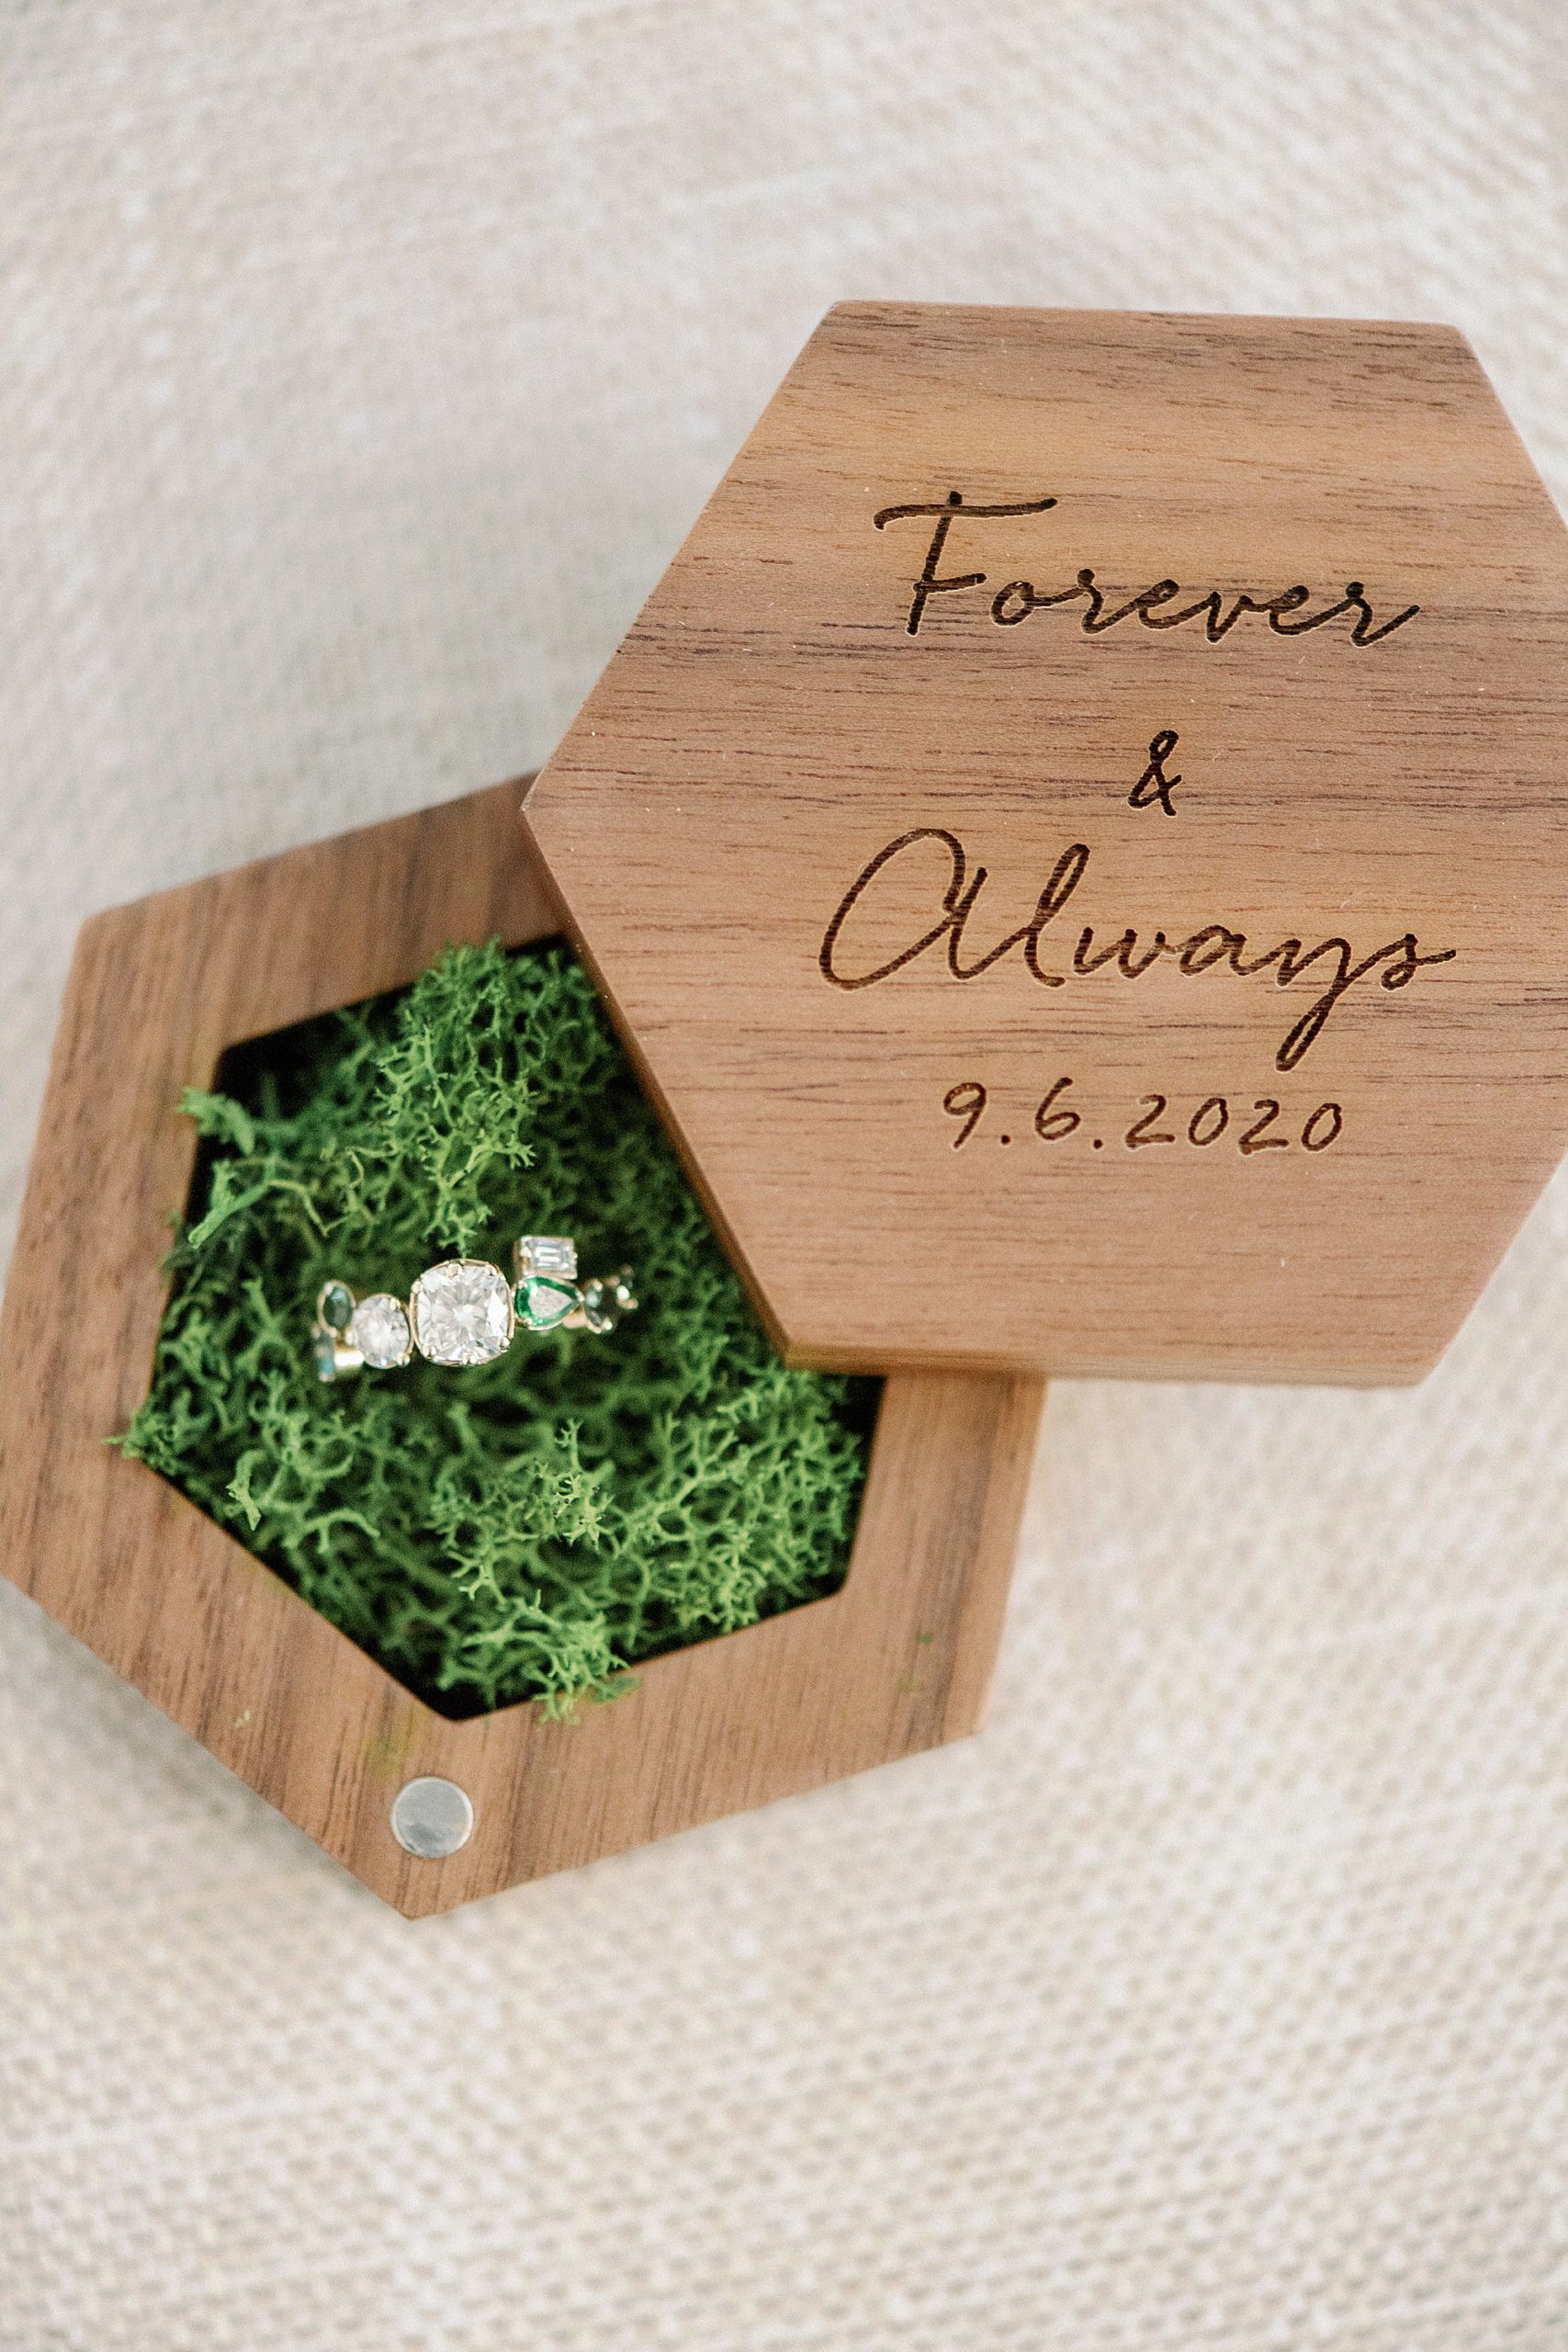 Lake placid wedding engagement ring in wooden ring box with engraving